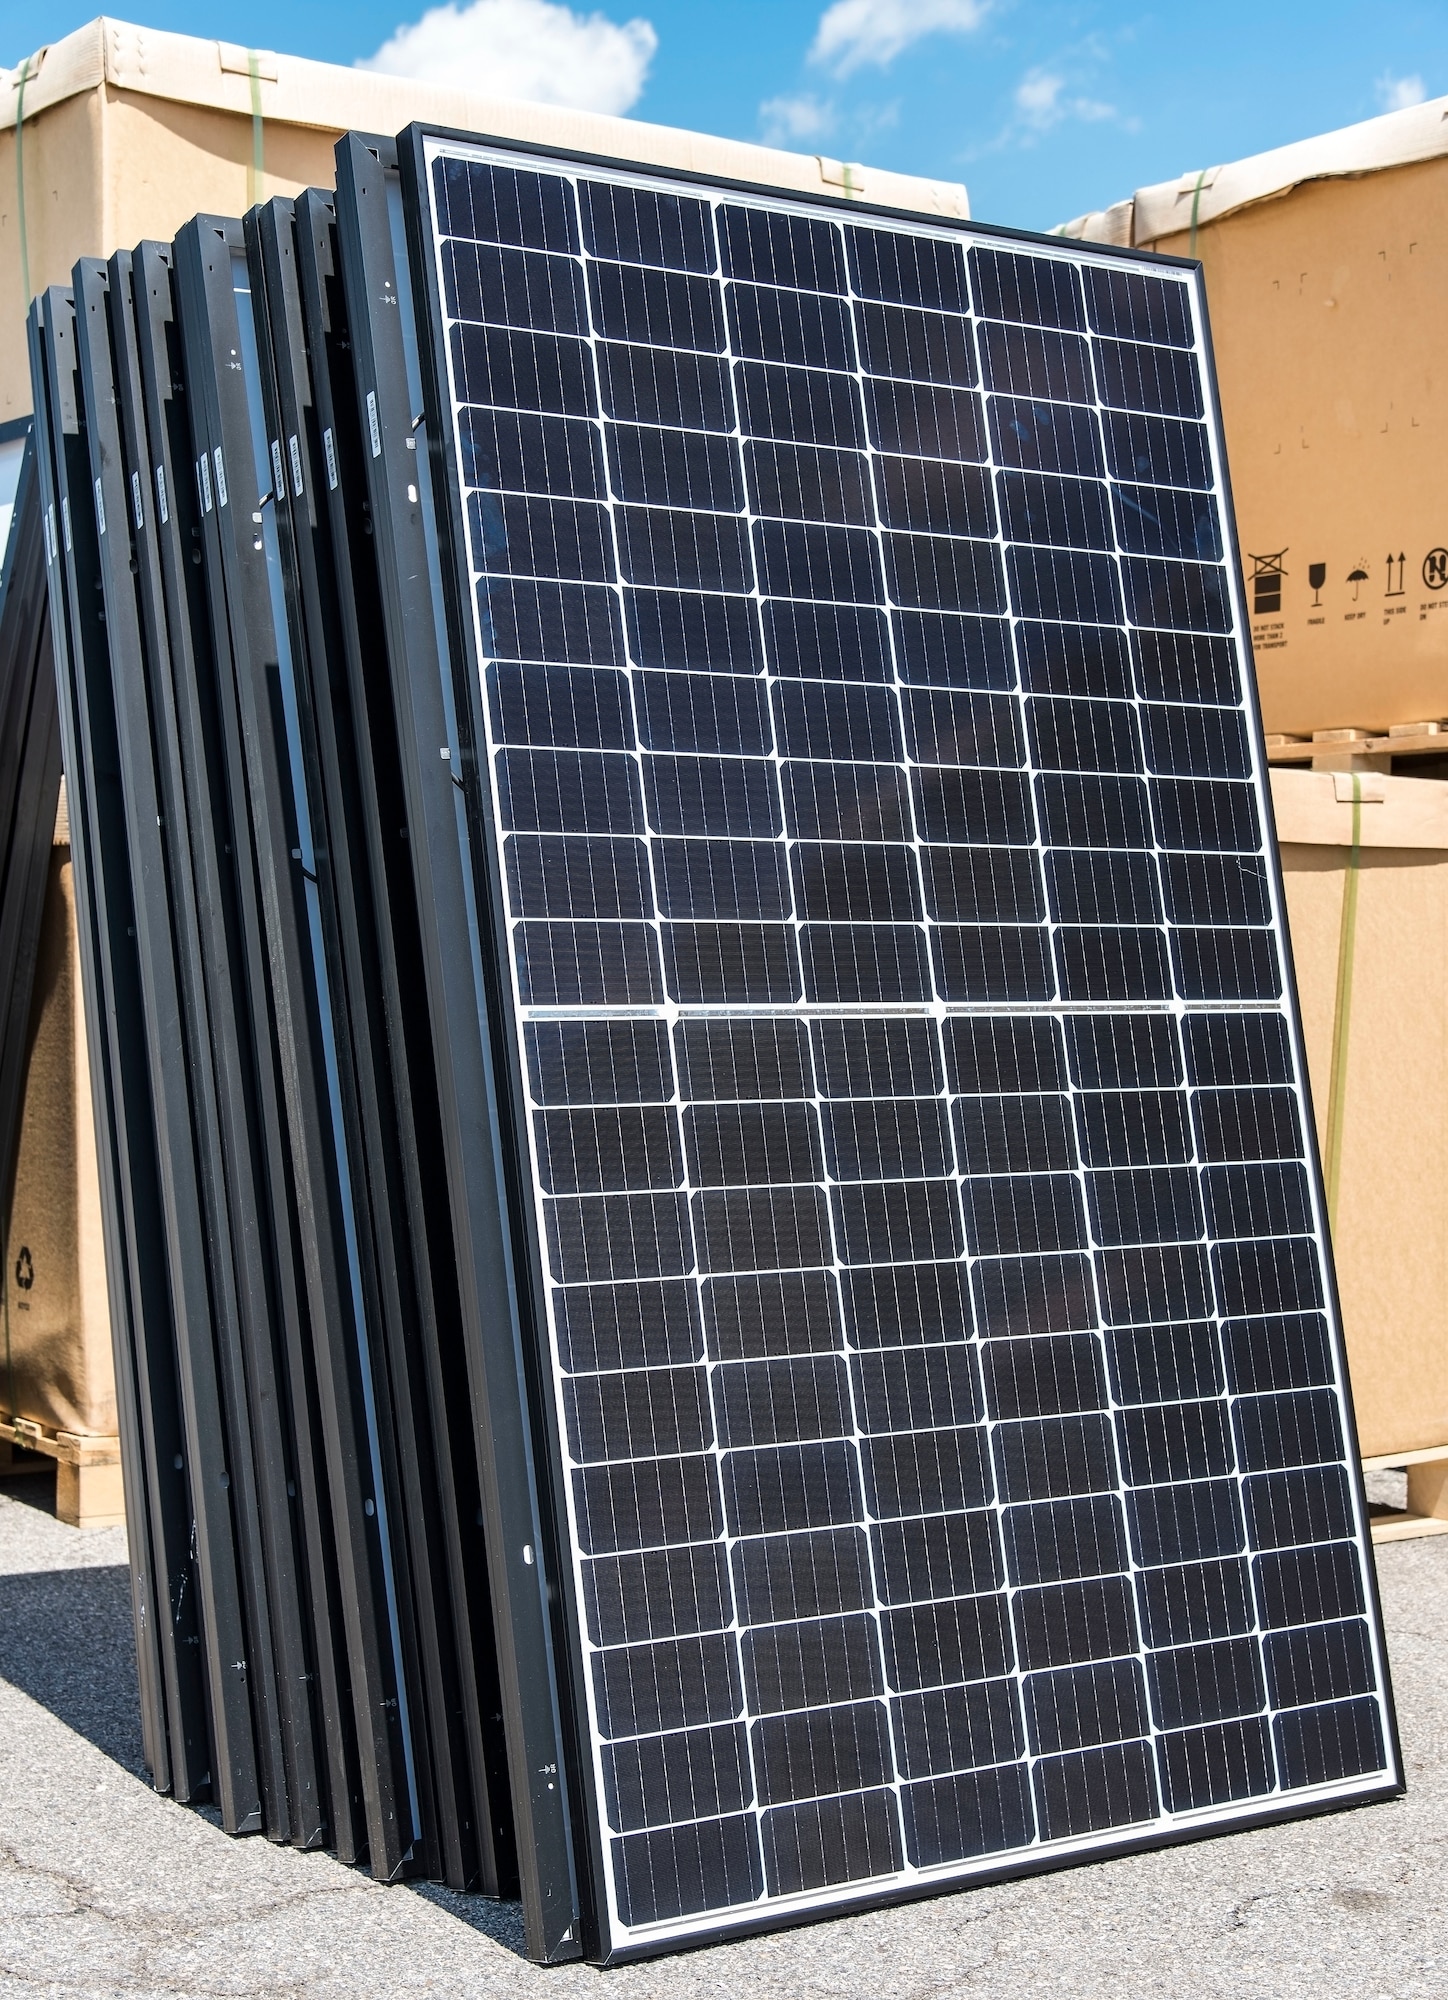 A group of unboxed photovoltaic (PV) panels wait to be taken to a job site in the Dover Family Housing community May 11, 2018, at the Base Theater on Dover Air Force Base, Del. One hundred forty-nine houses in the DFH community are scheduled to have the panels installed on them. (U.S. Air Force photo by Roland Balik)